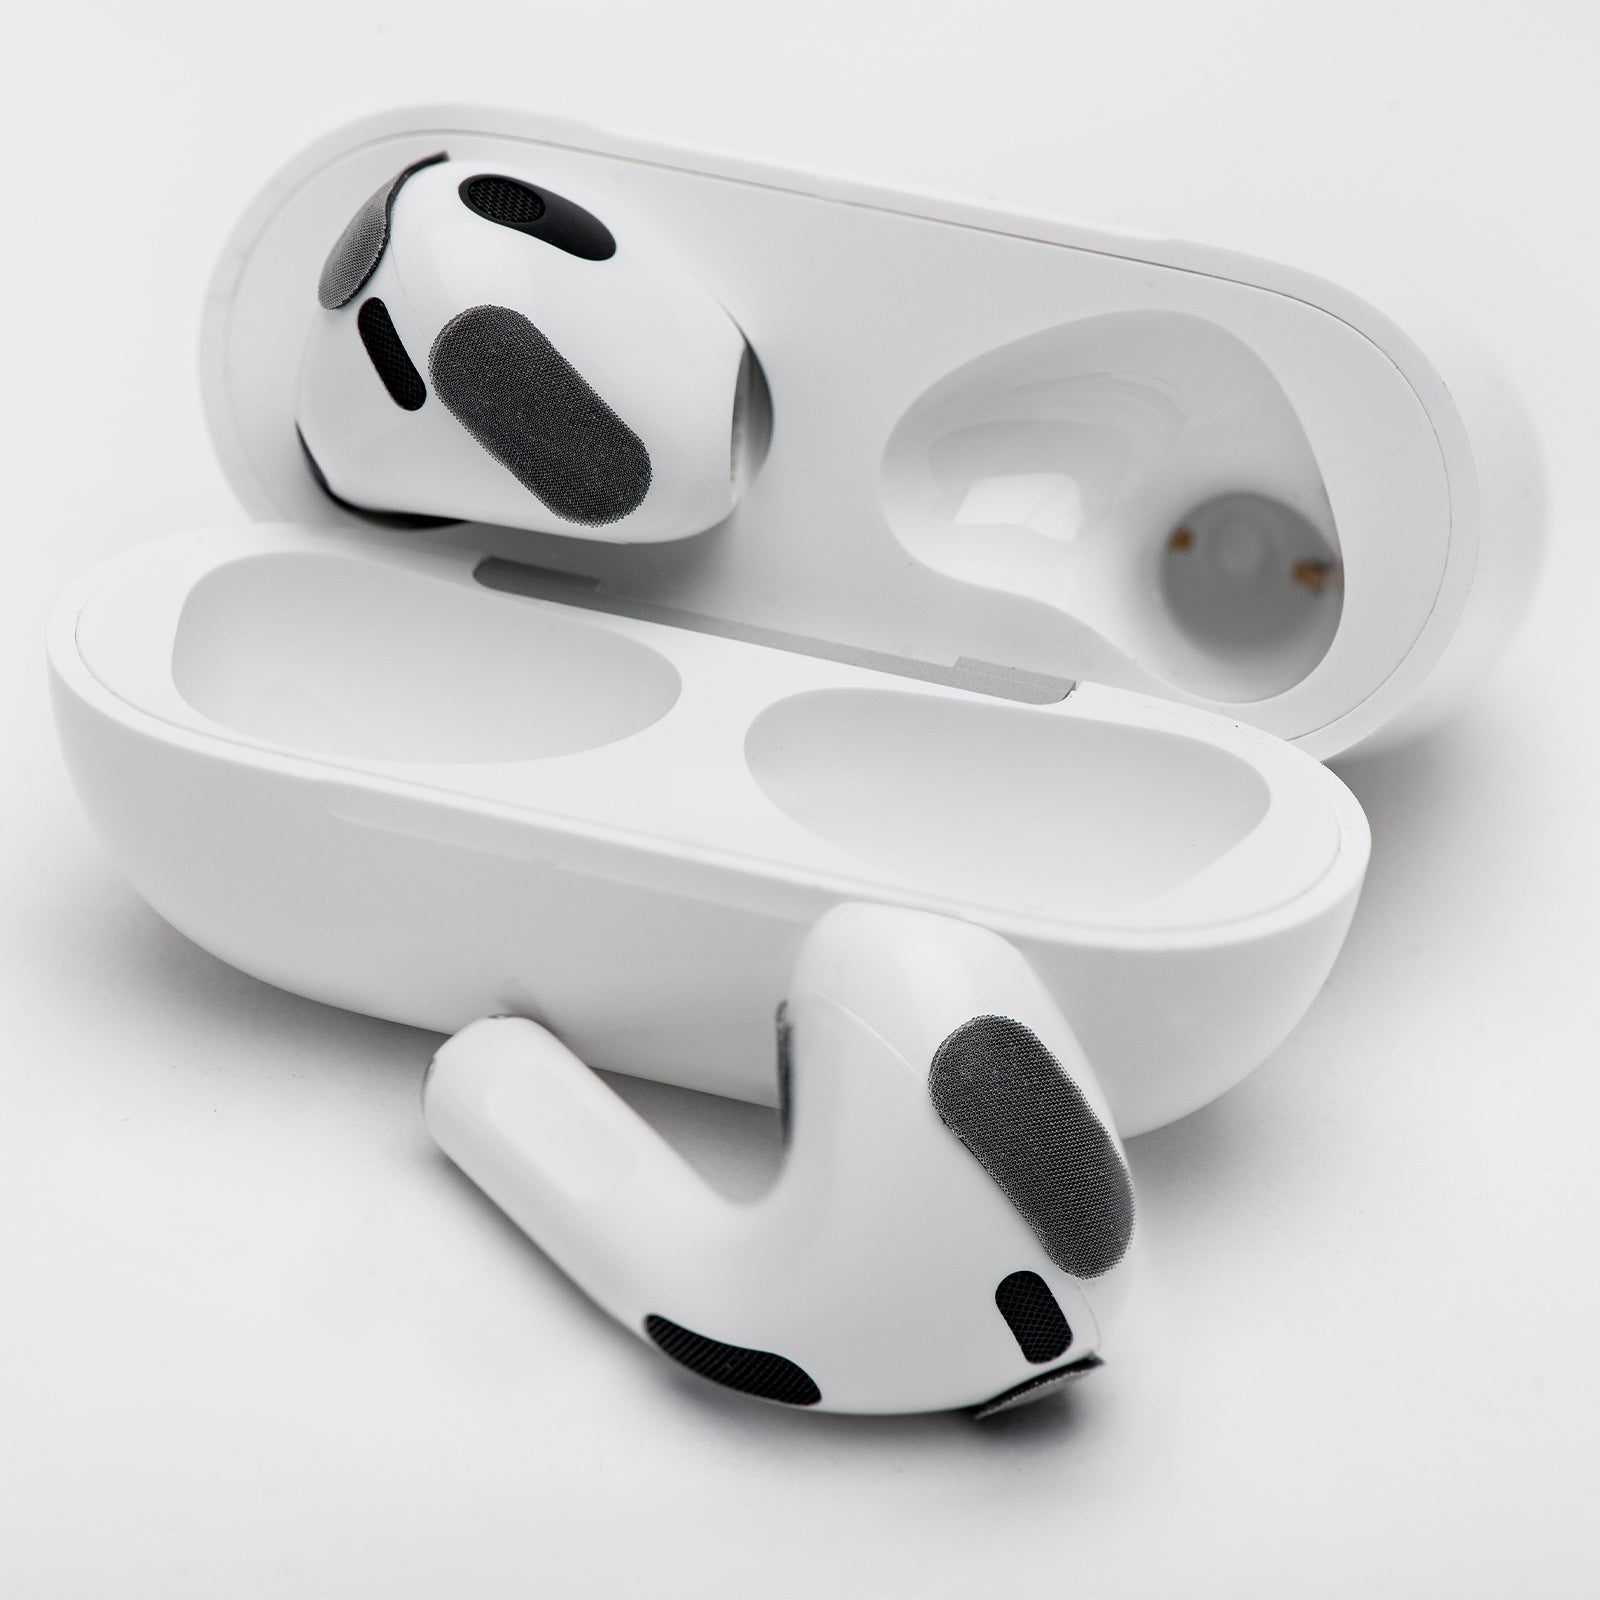 Apple Airpods Case: Apple working on AirPods case that will